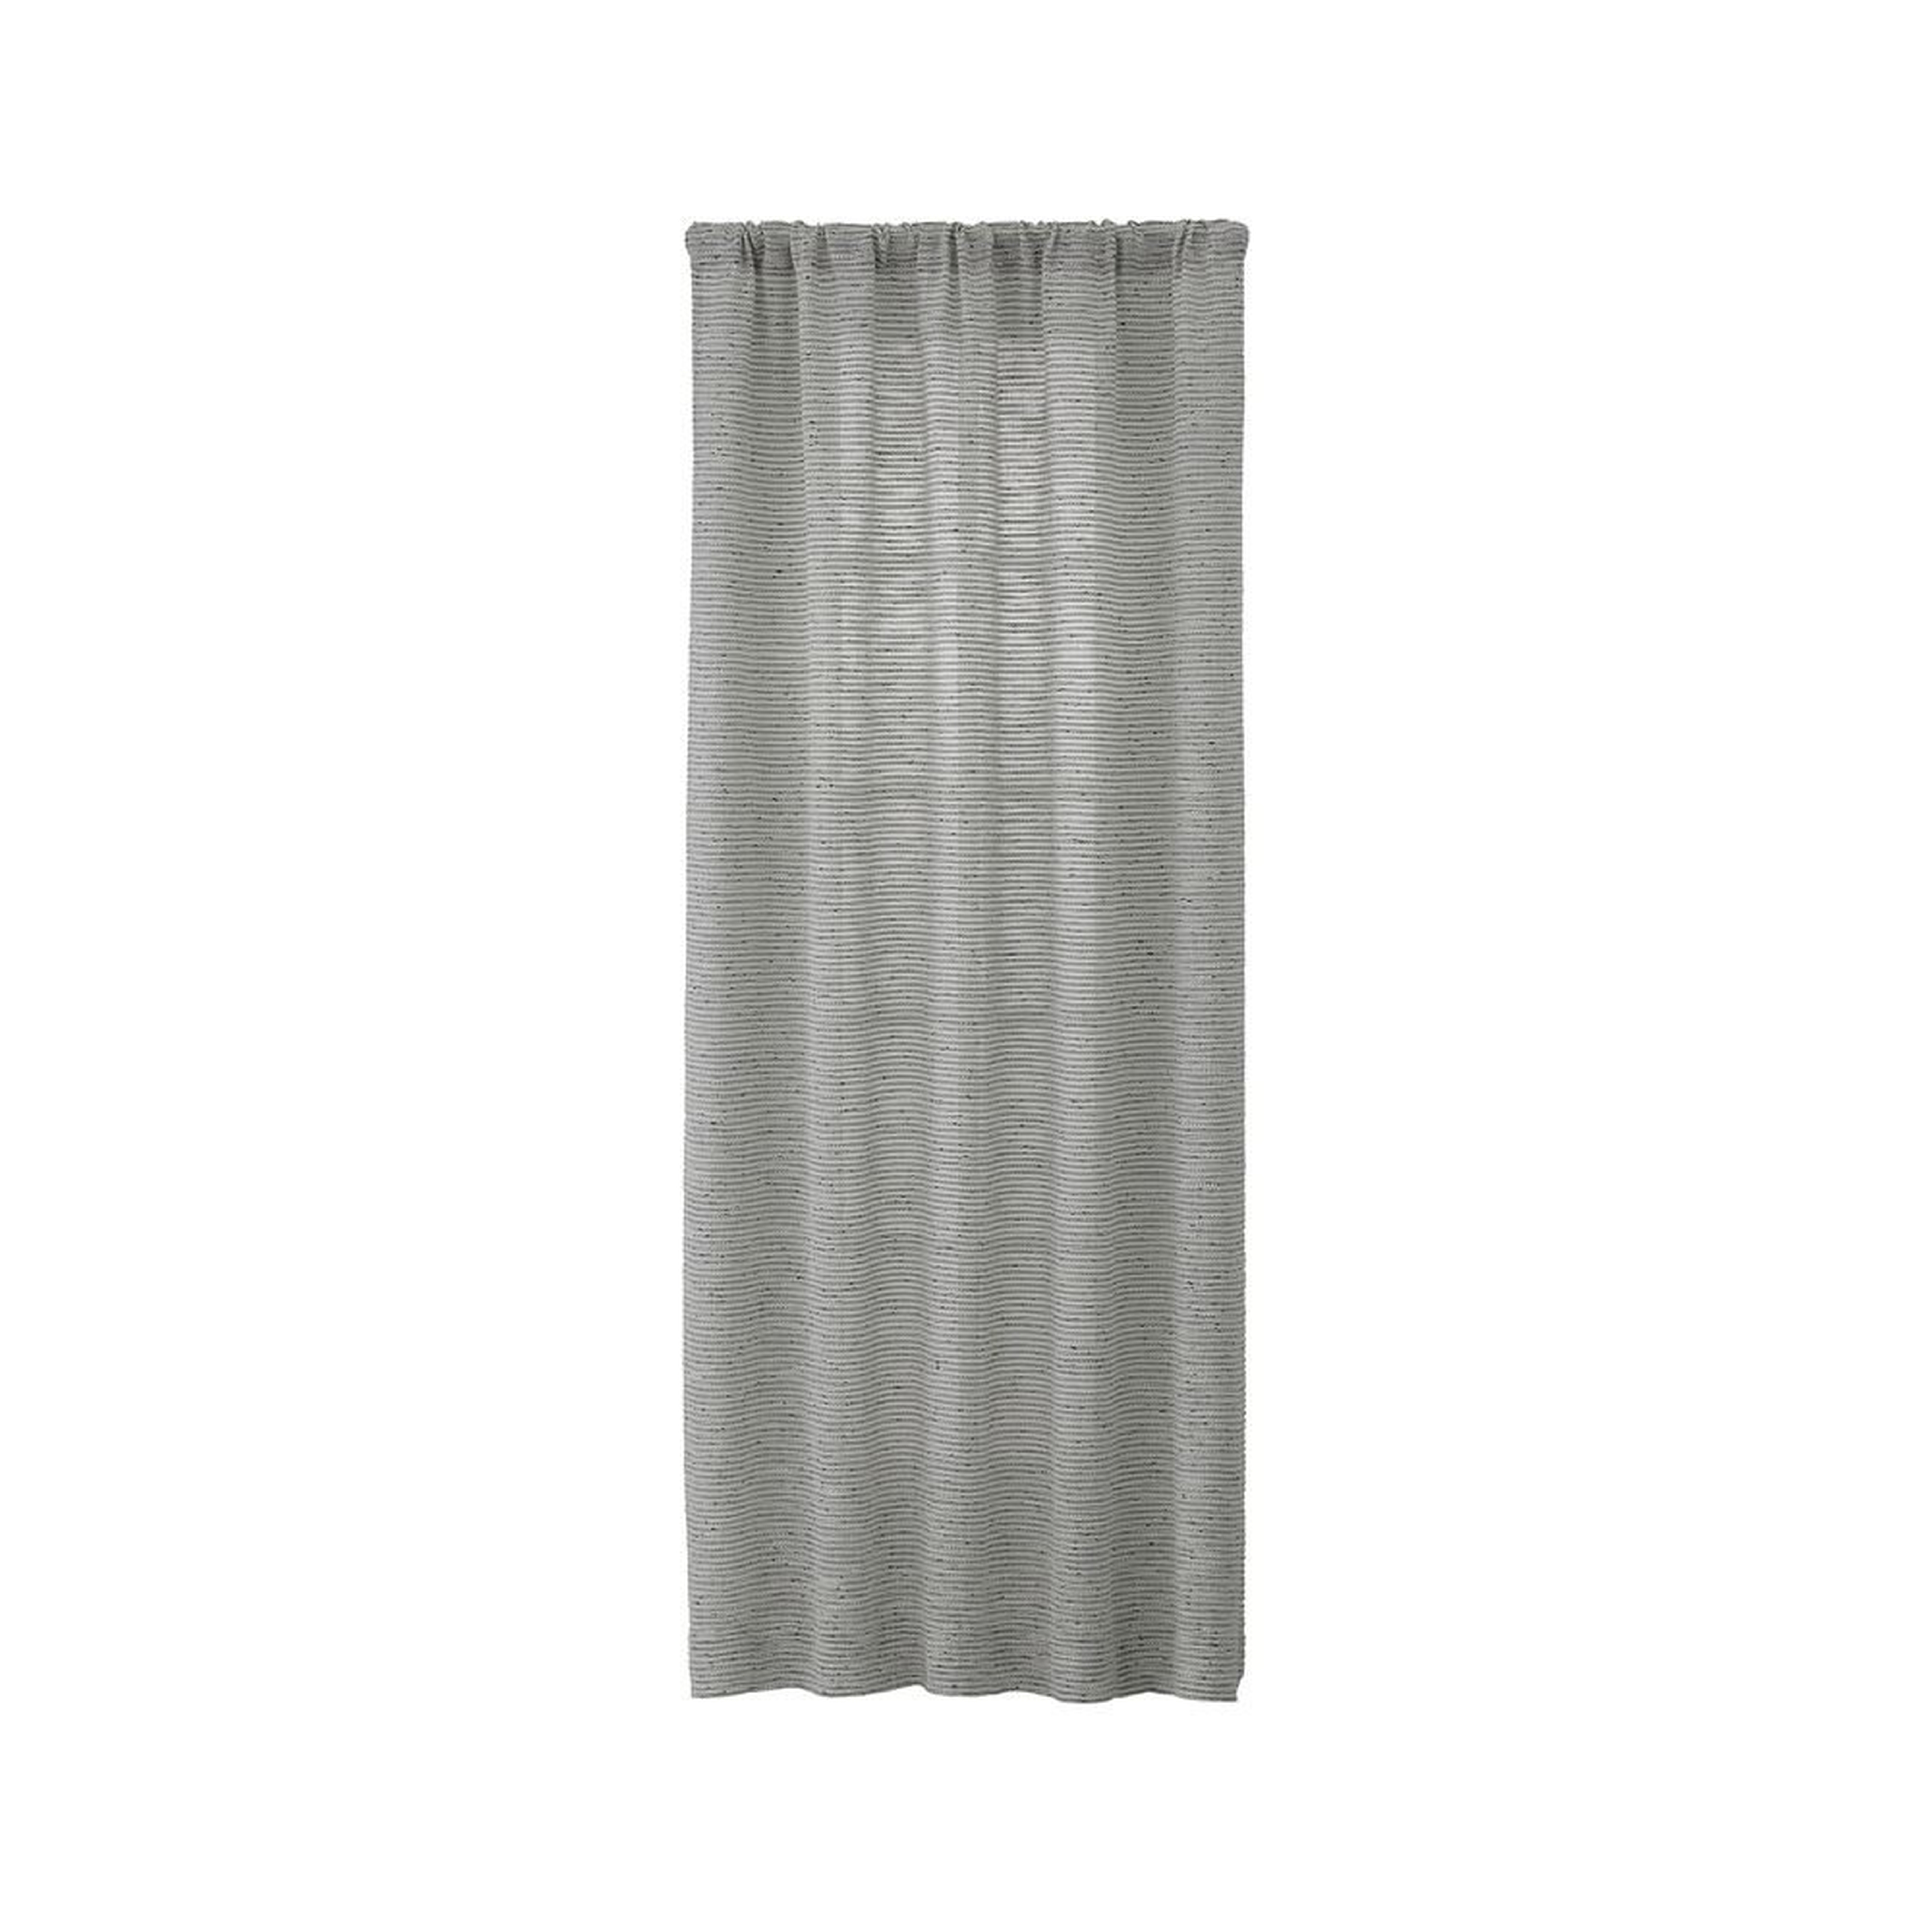 Vesta Textured Curtain Panel 50x84 - Crate and Barrel